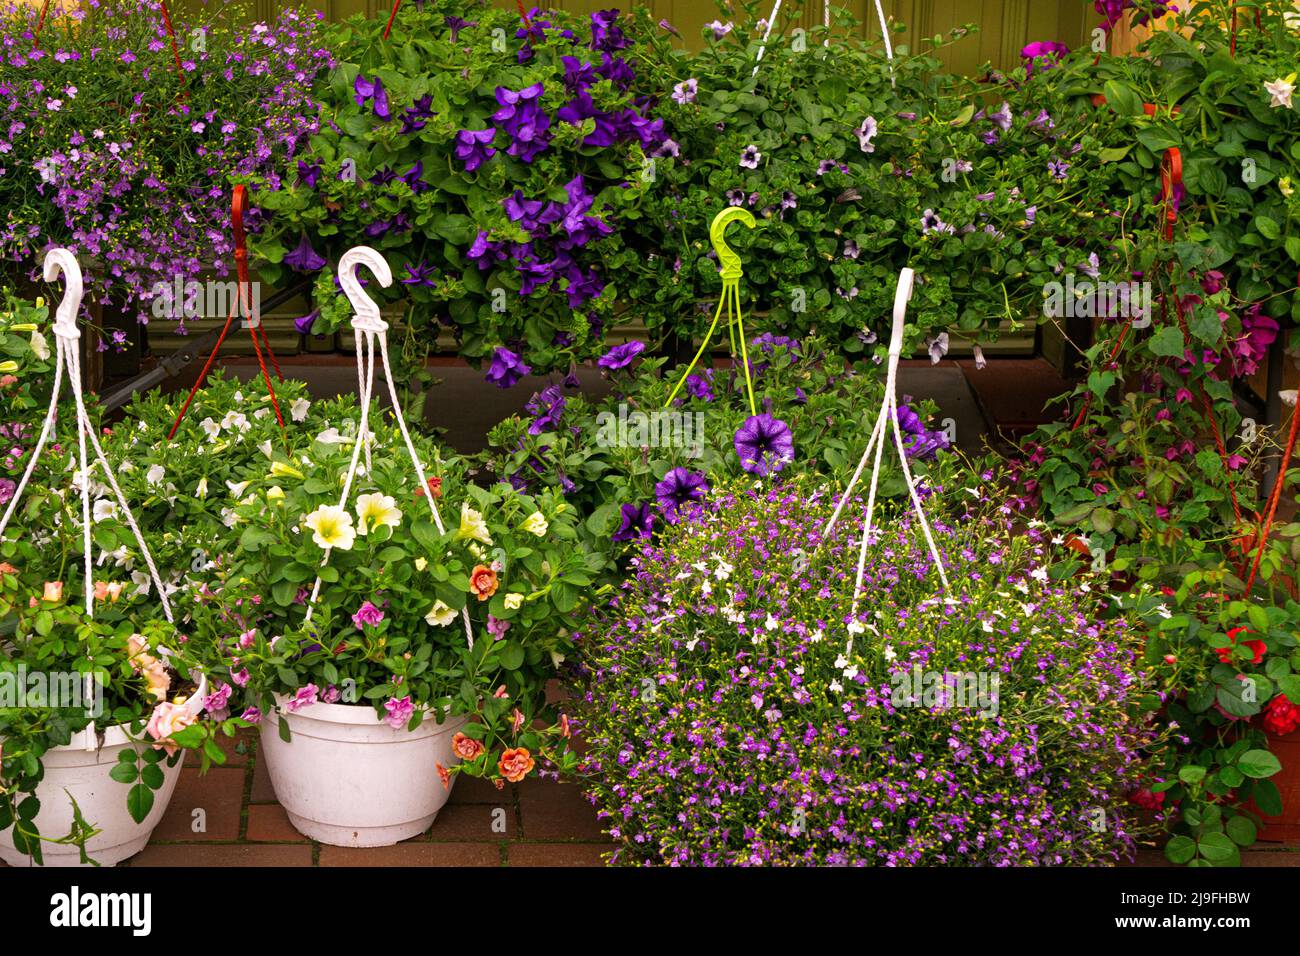 Seedlings of decorative flowers in flower pots close-up. Stock Photo